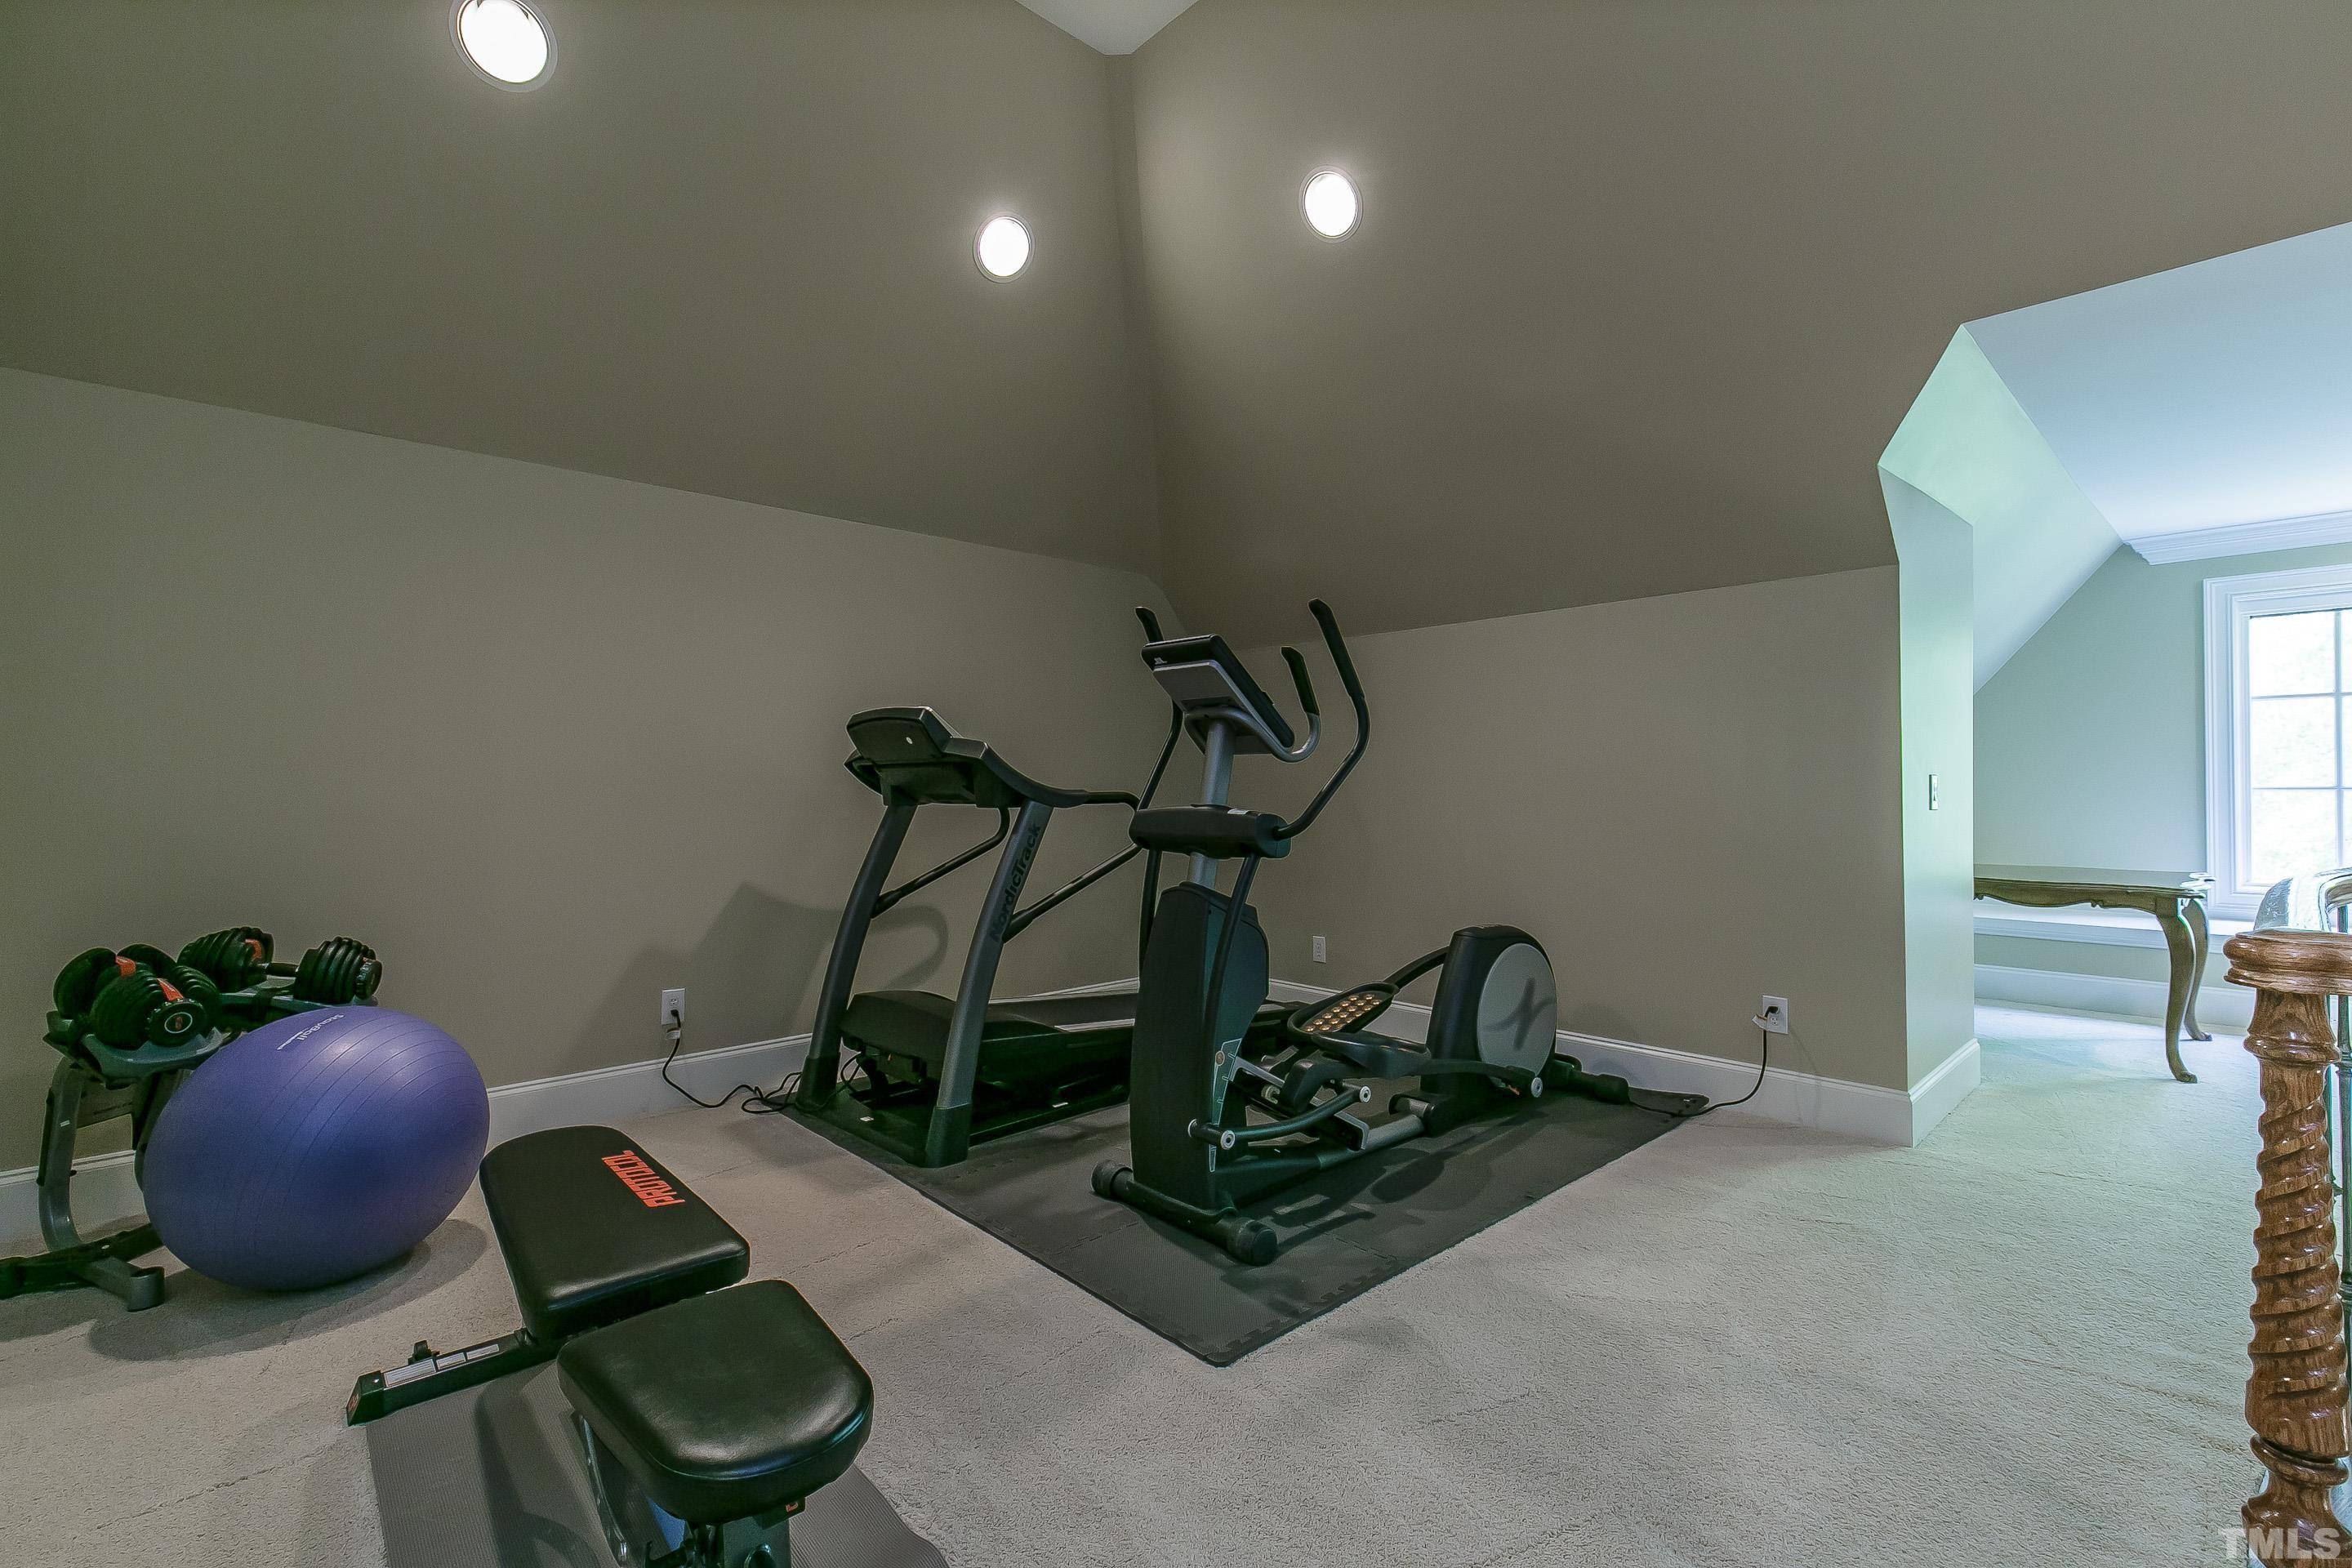 Exercise space with recessed lights and carpet